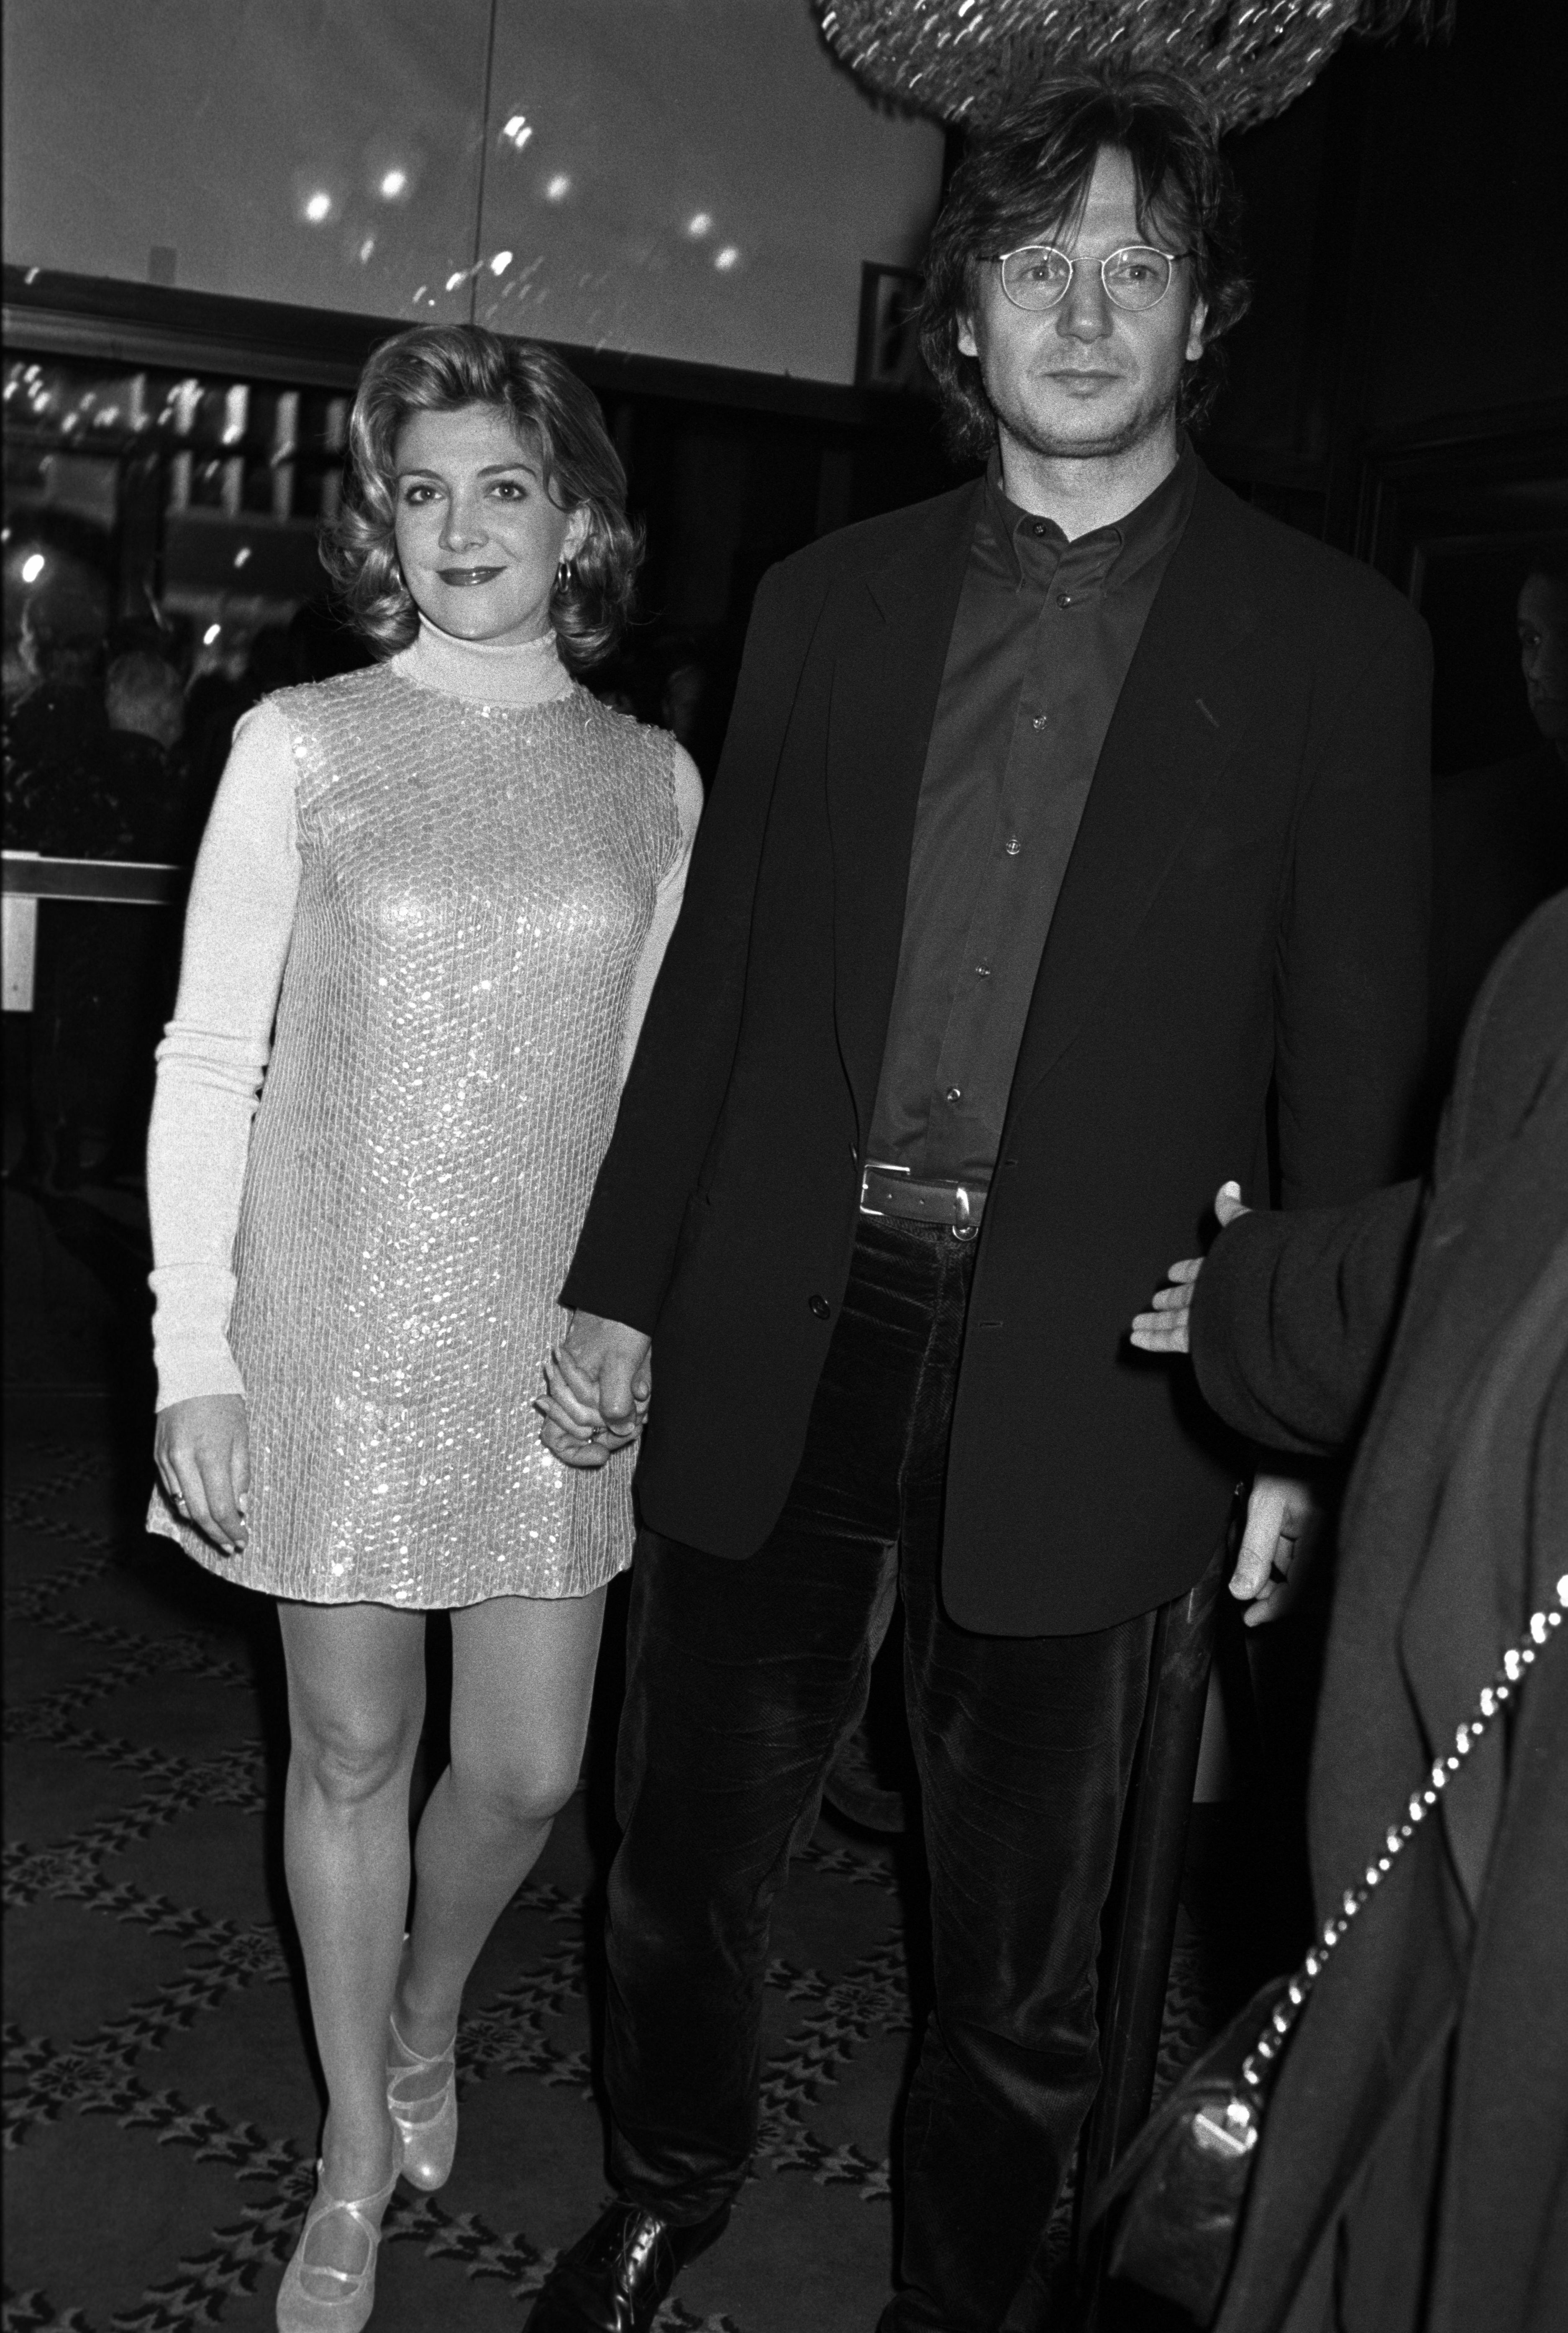 Actress Natasha Richardson with husband Liam Neeson at the premiere of the movie "Nell" | Source: Getty Images